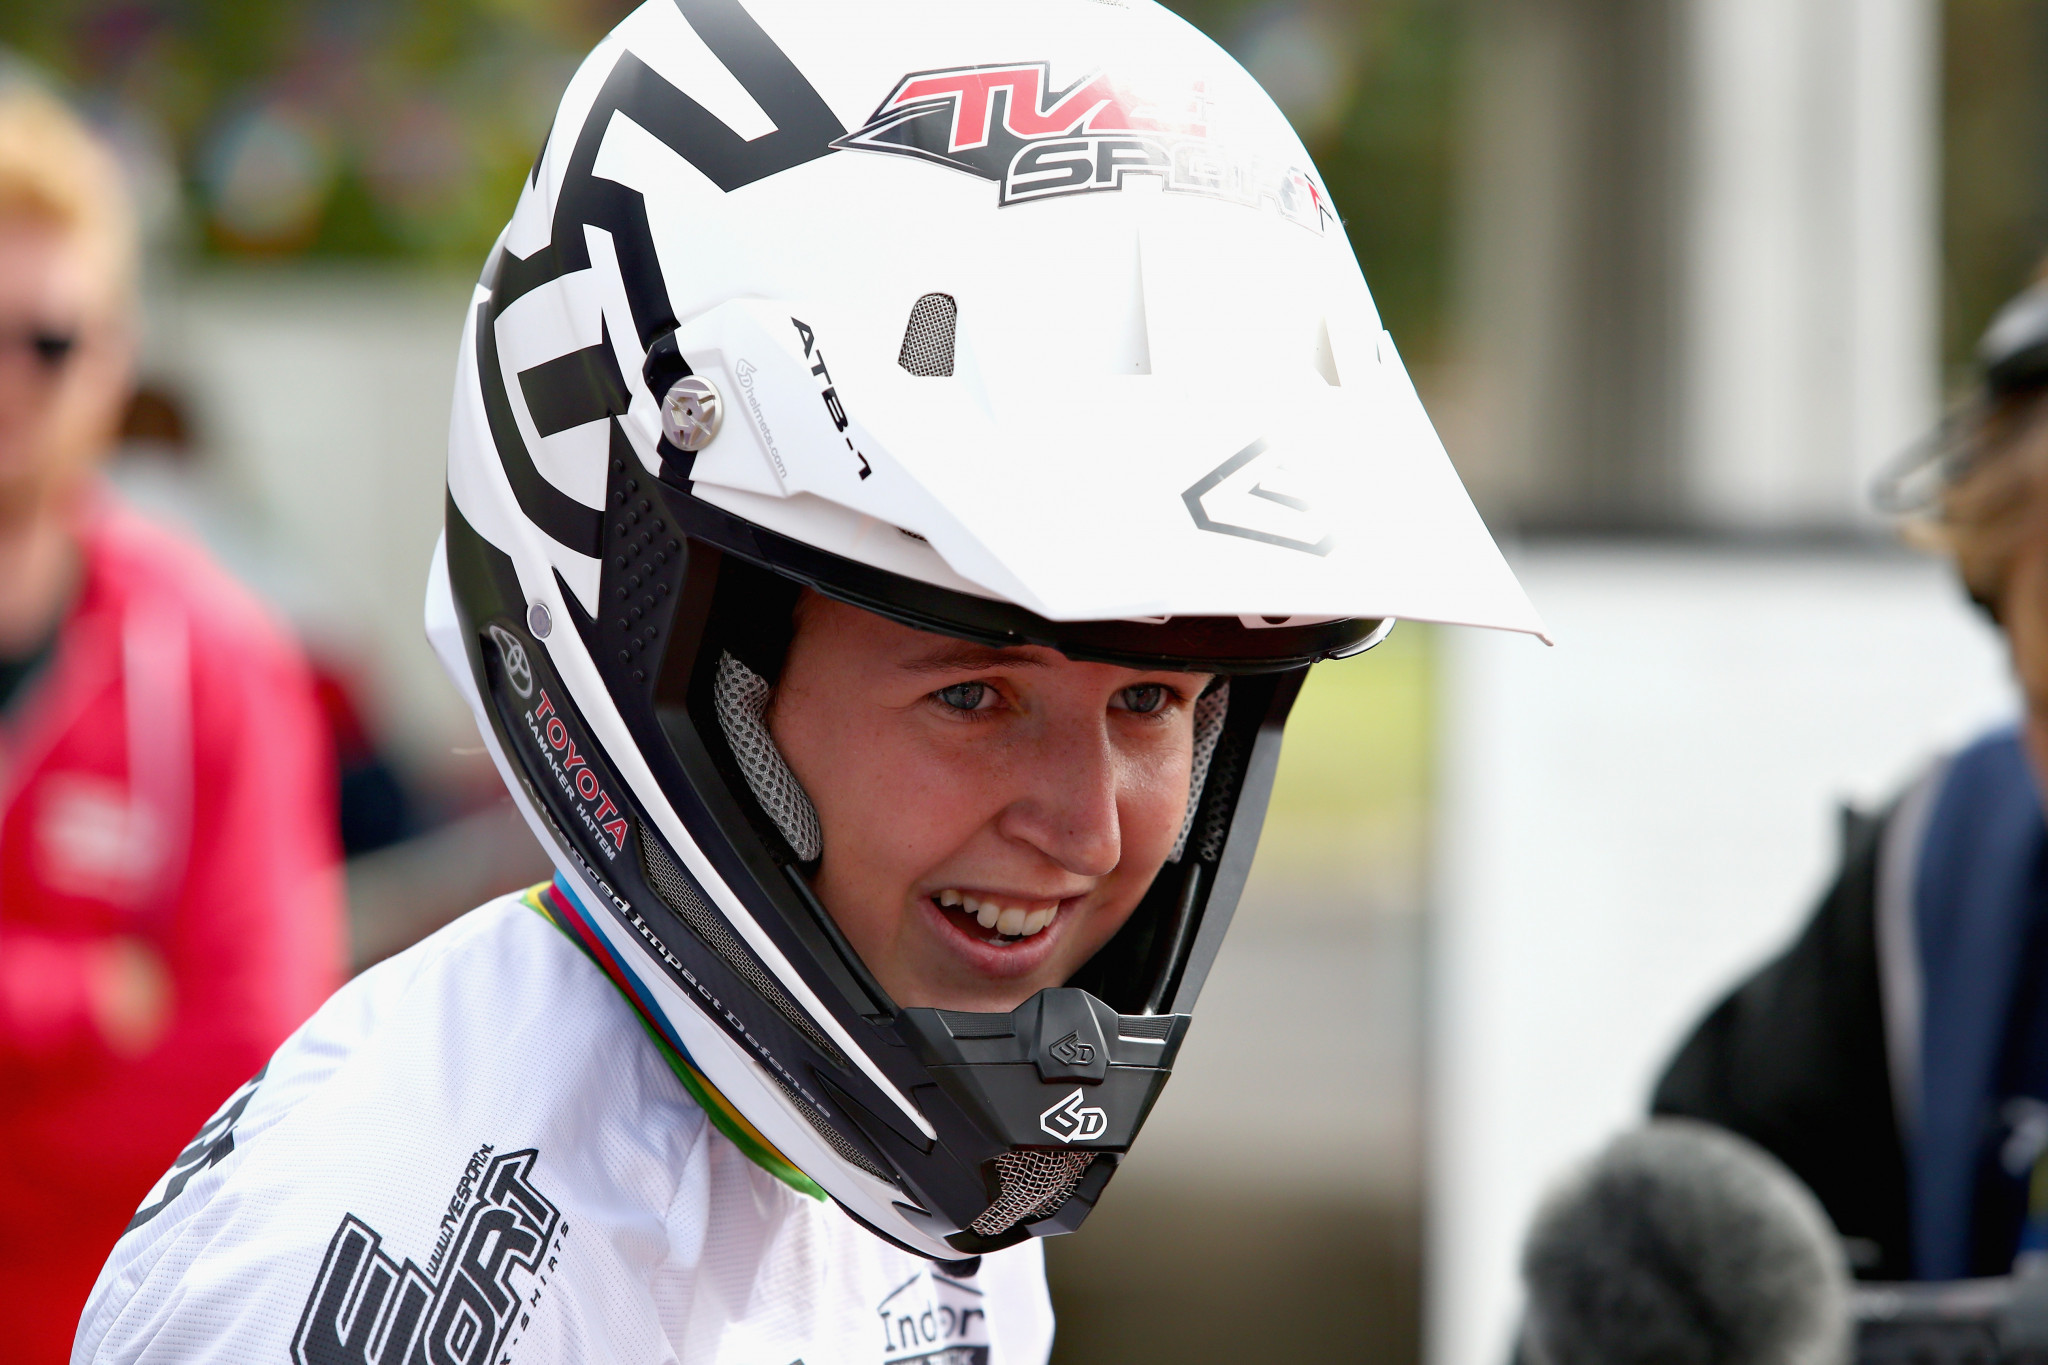 Graf and Smulders victorious in second round of UCI BMX Supercross World Cup